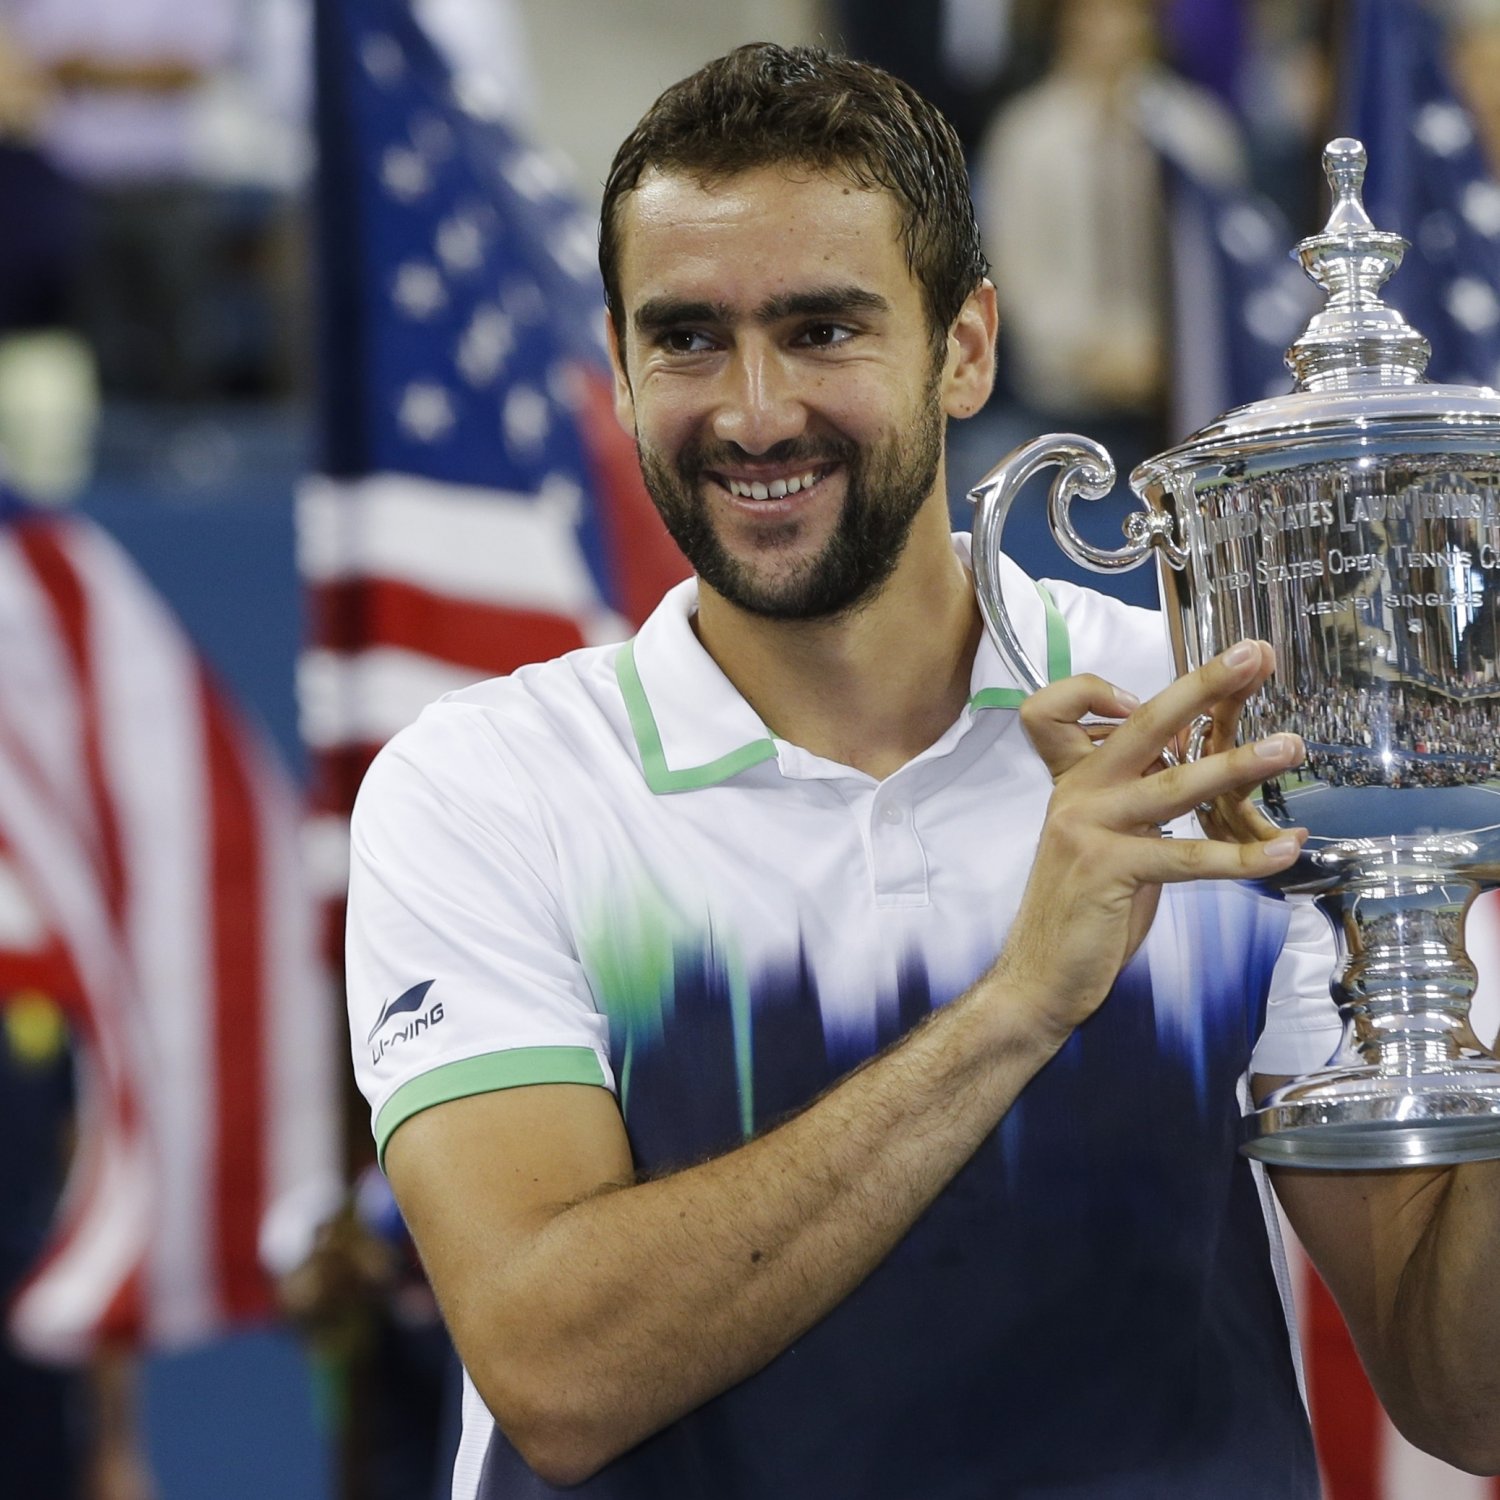 US Open Tennis 2014 Men's Final Results and Updated Singles Rankings